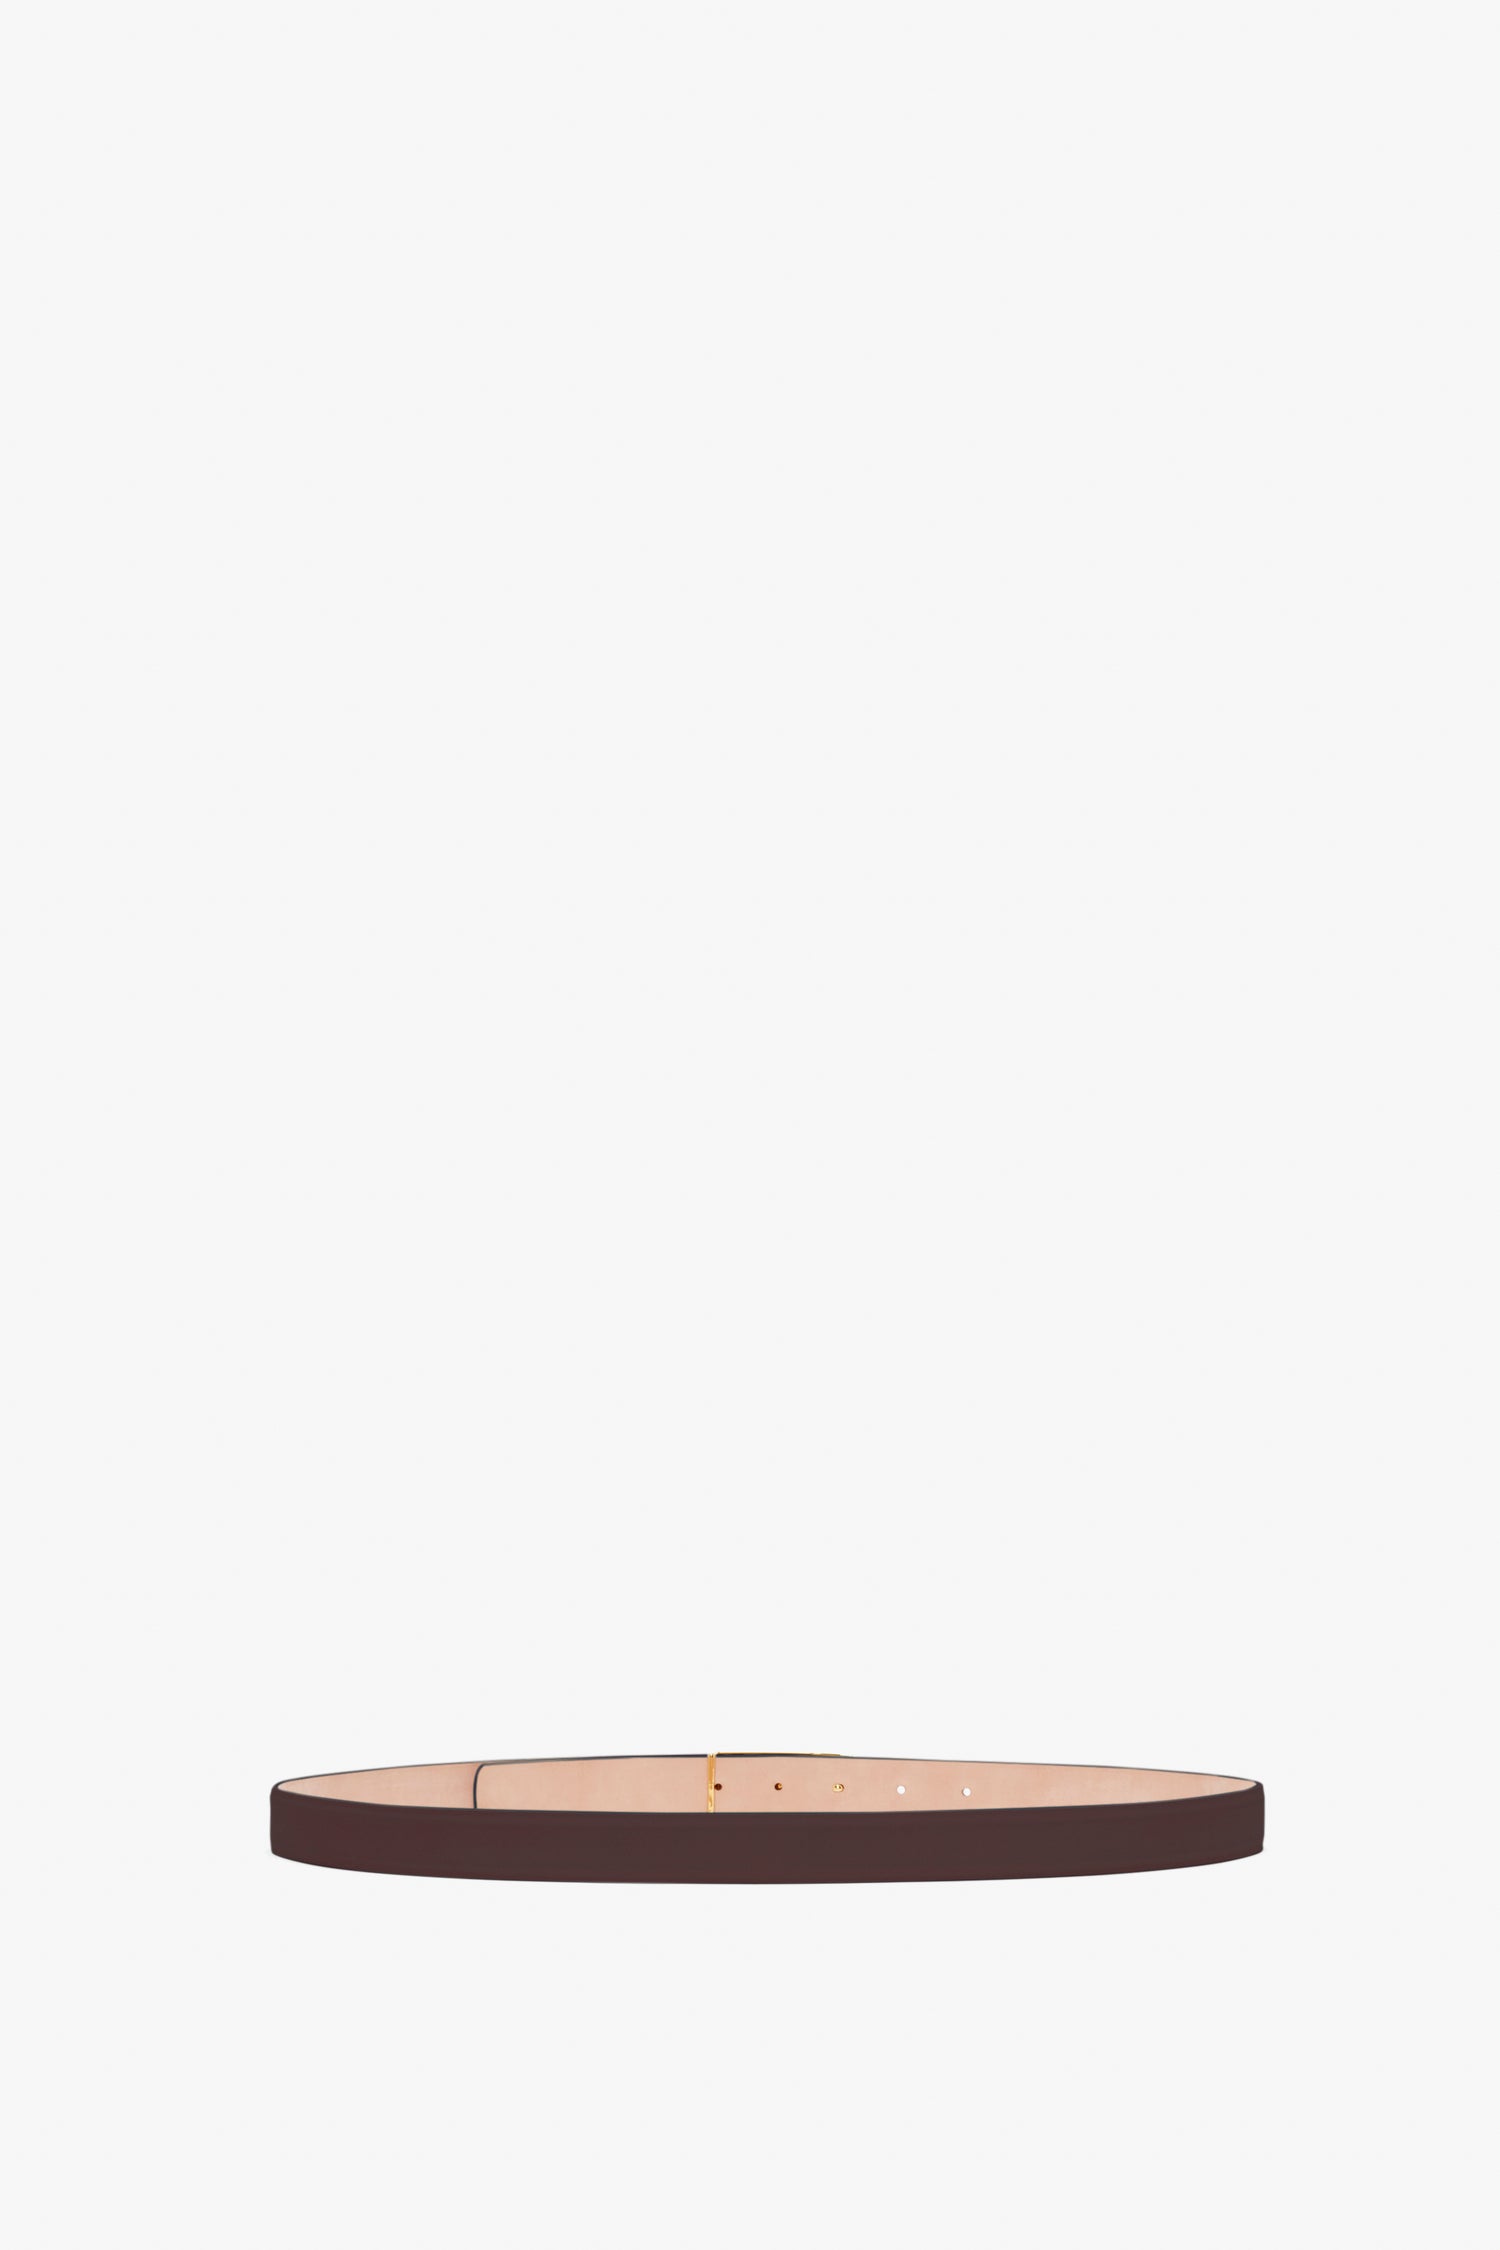 A thin, burgundy calf leather belt with a simple buckle and gold hardware, laid flat against a white background, the Frame Belt In Burgundy Leather by Victoria Beckham.